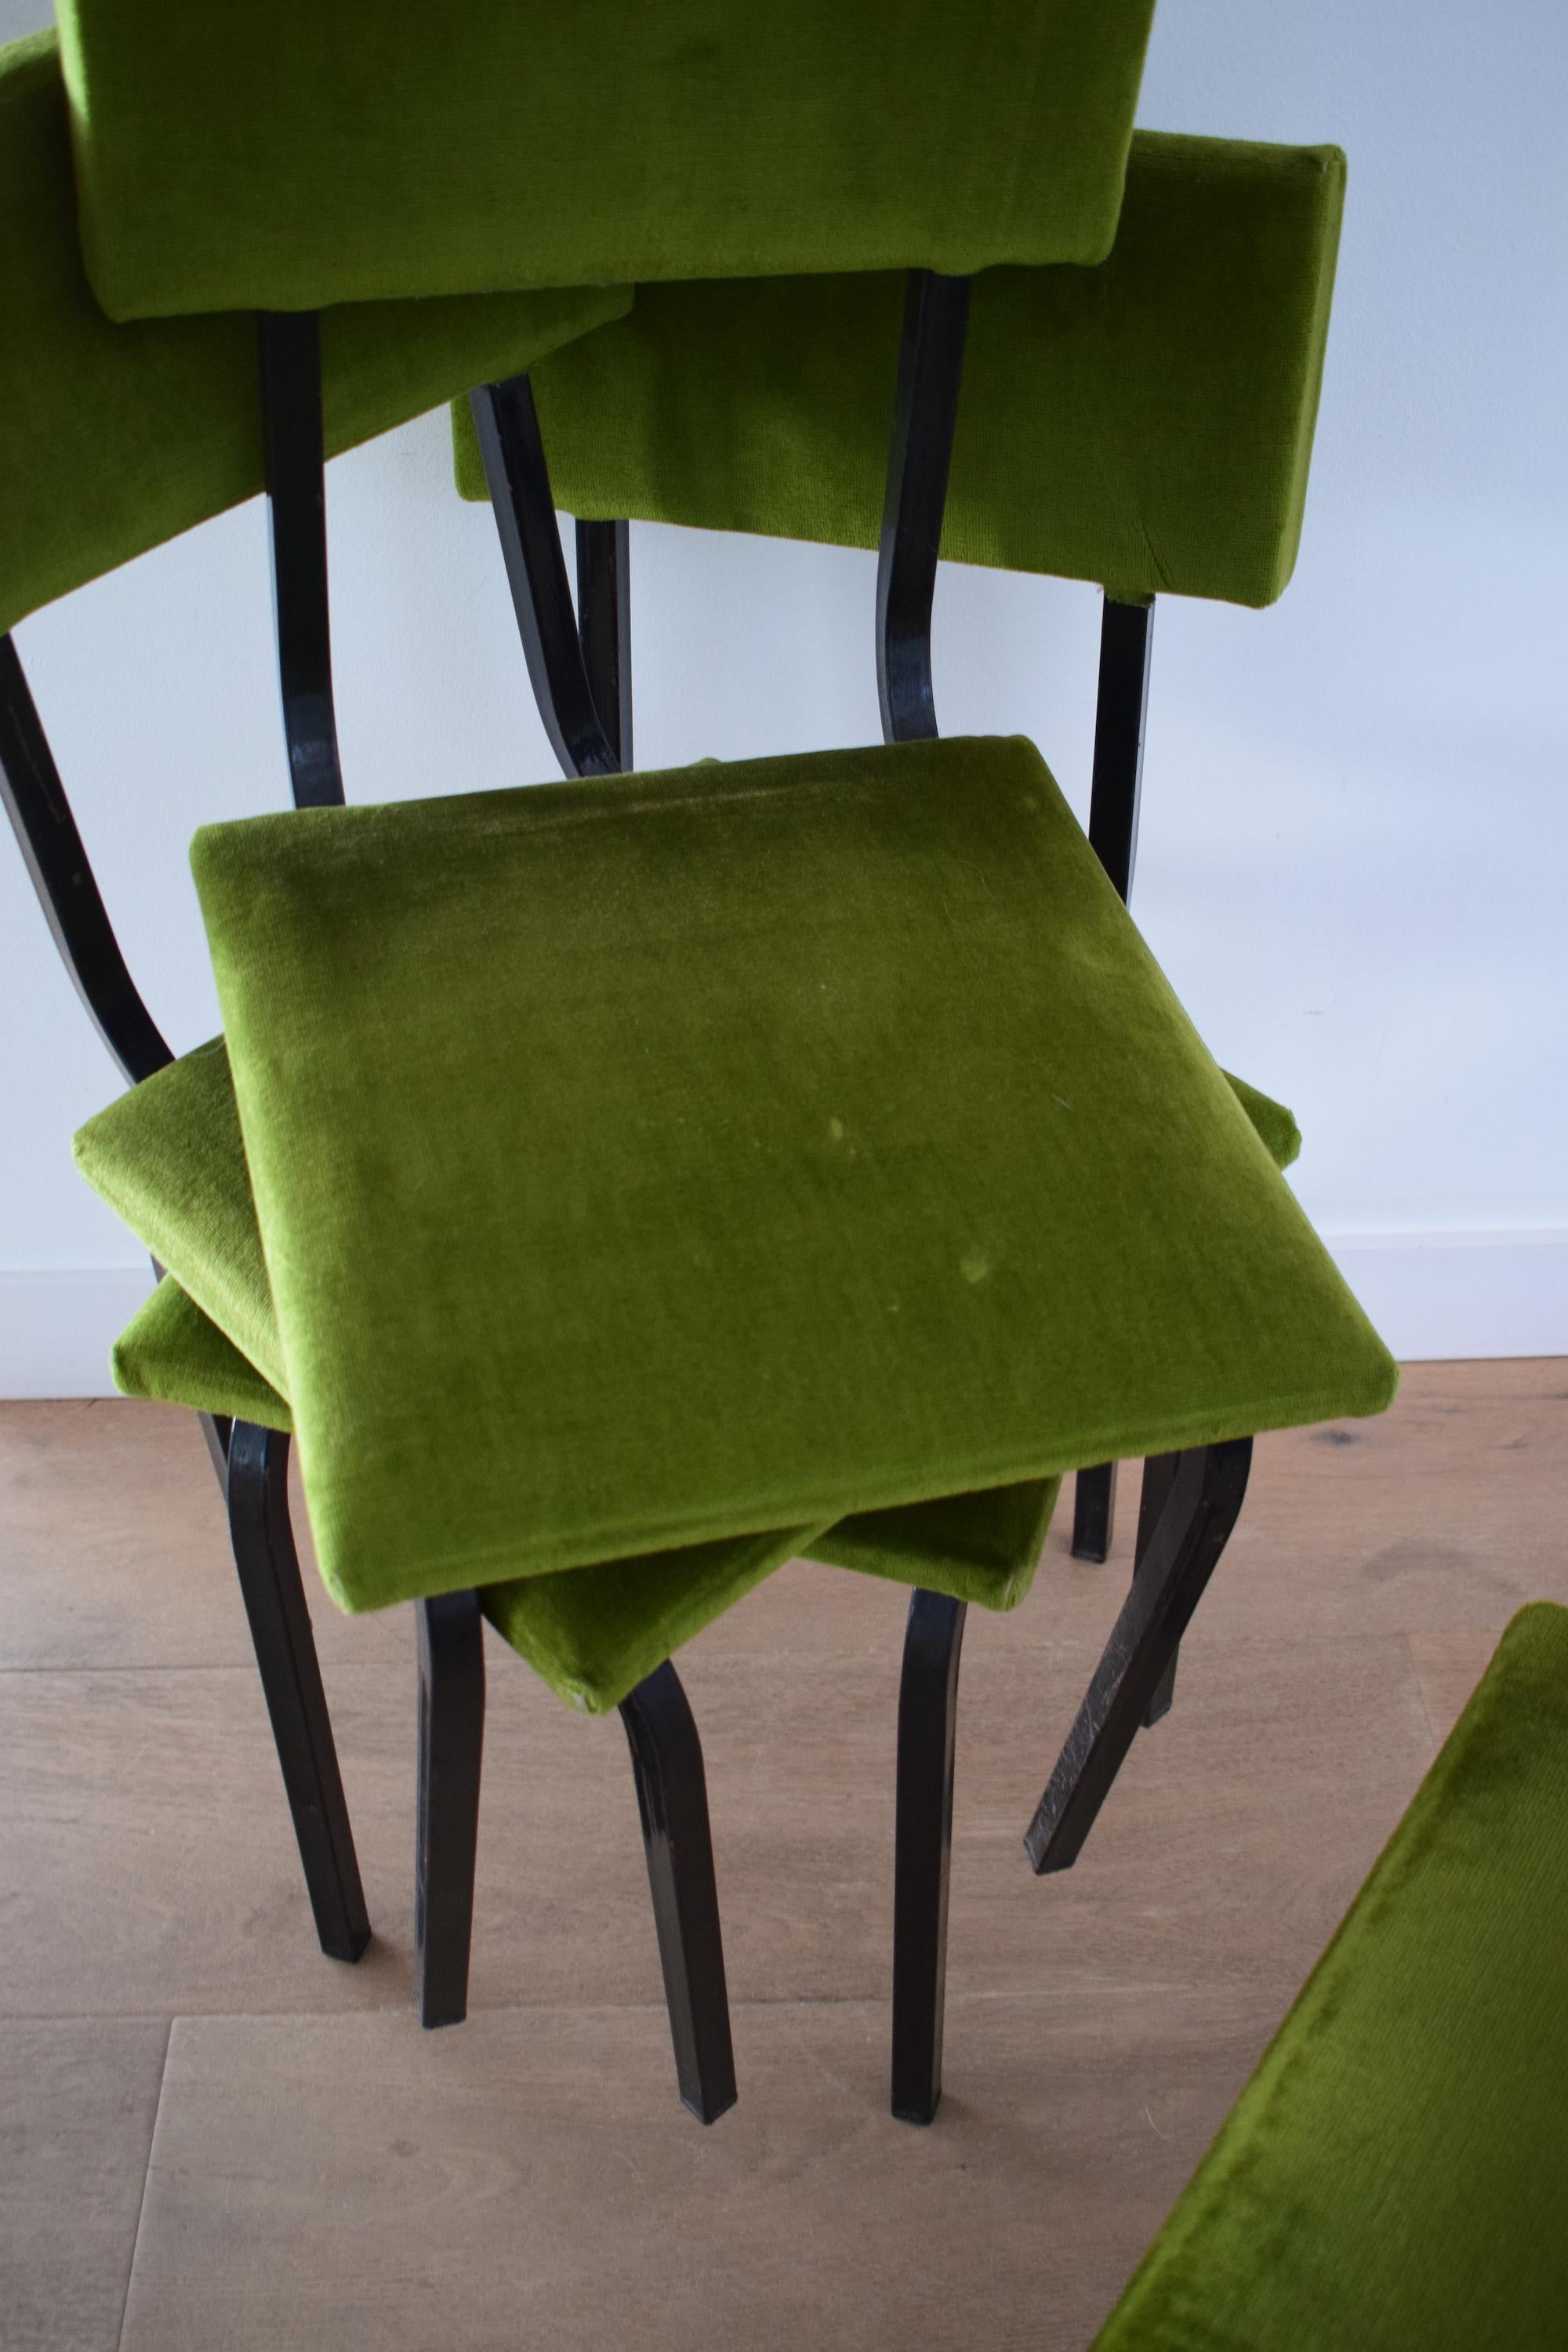 Spanish Set of 4 1960s Dining Chairs in Green Velvet with Black Metal Frames